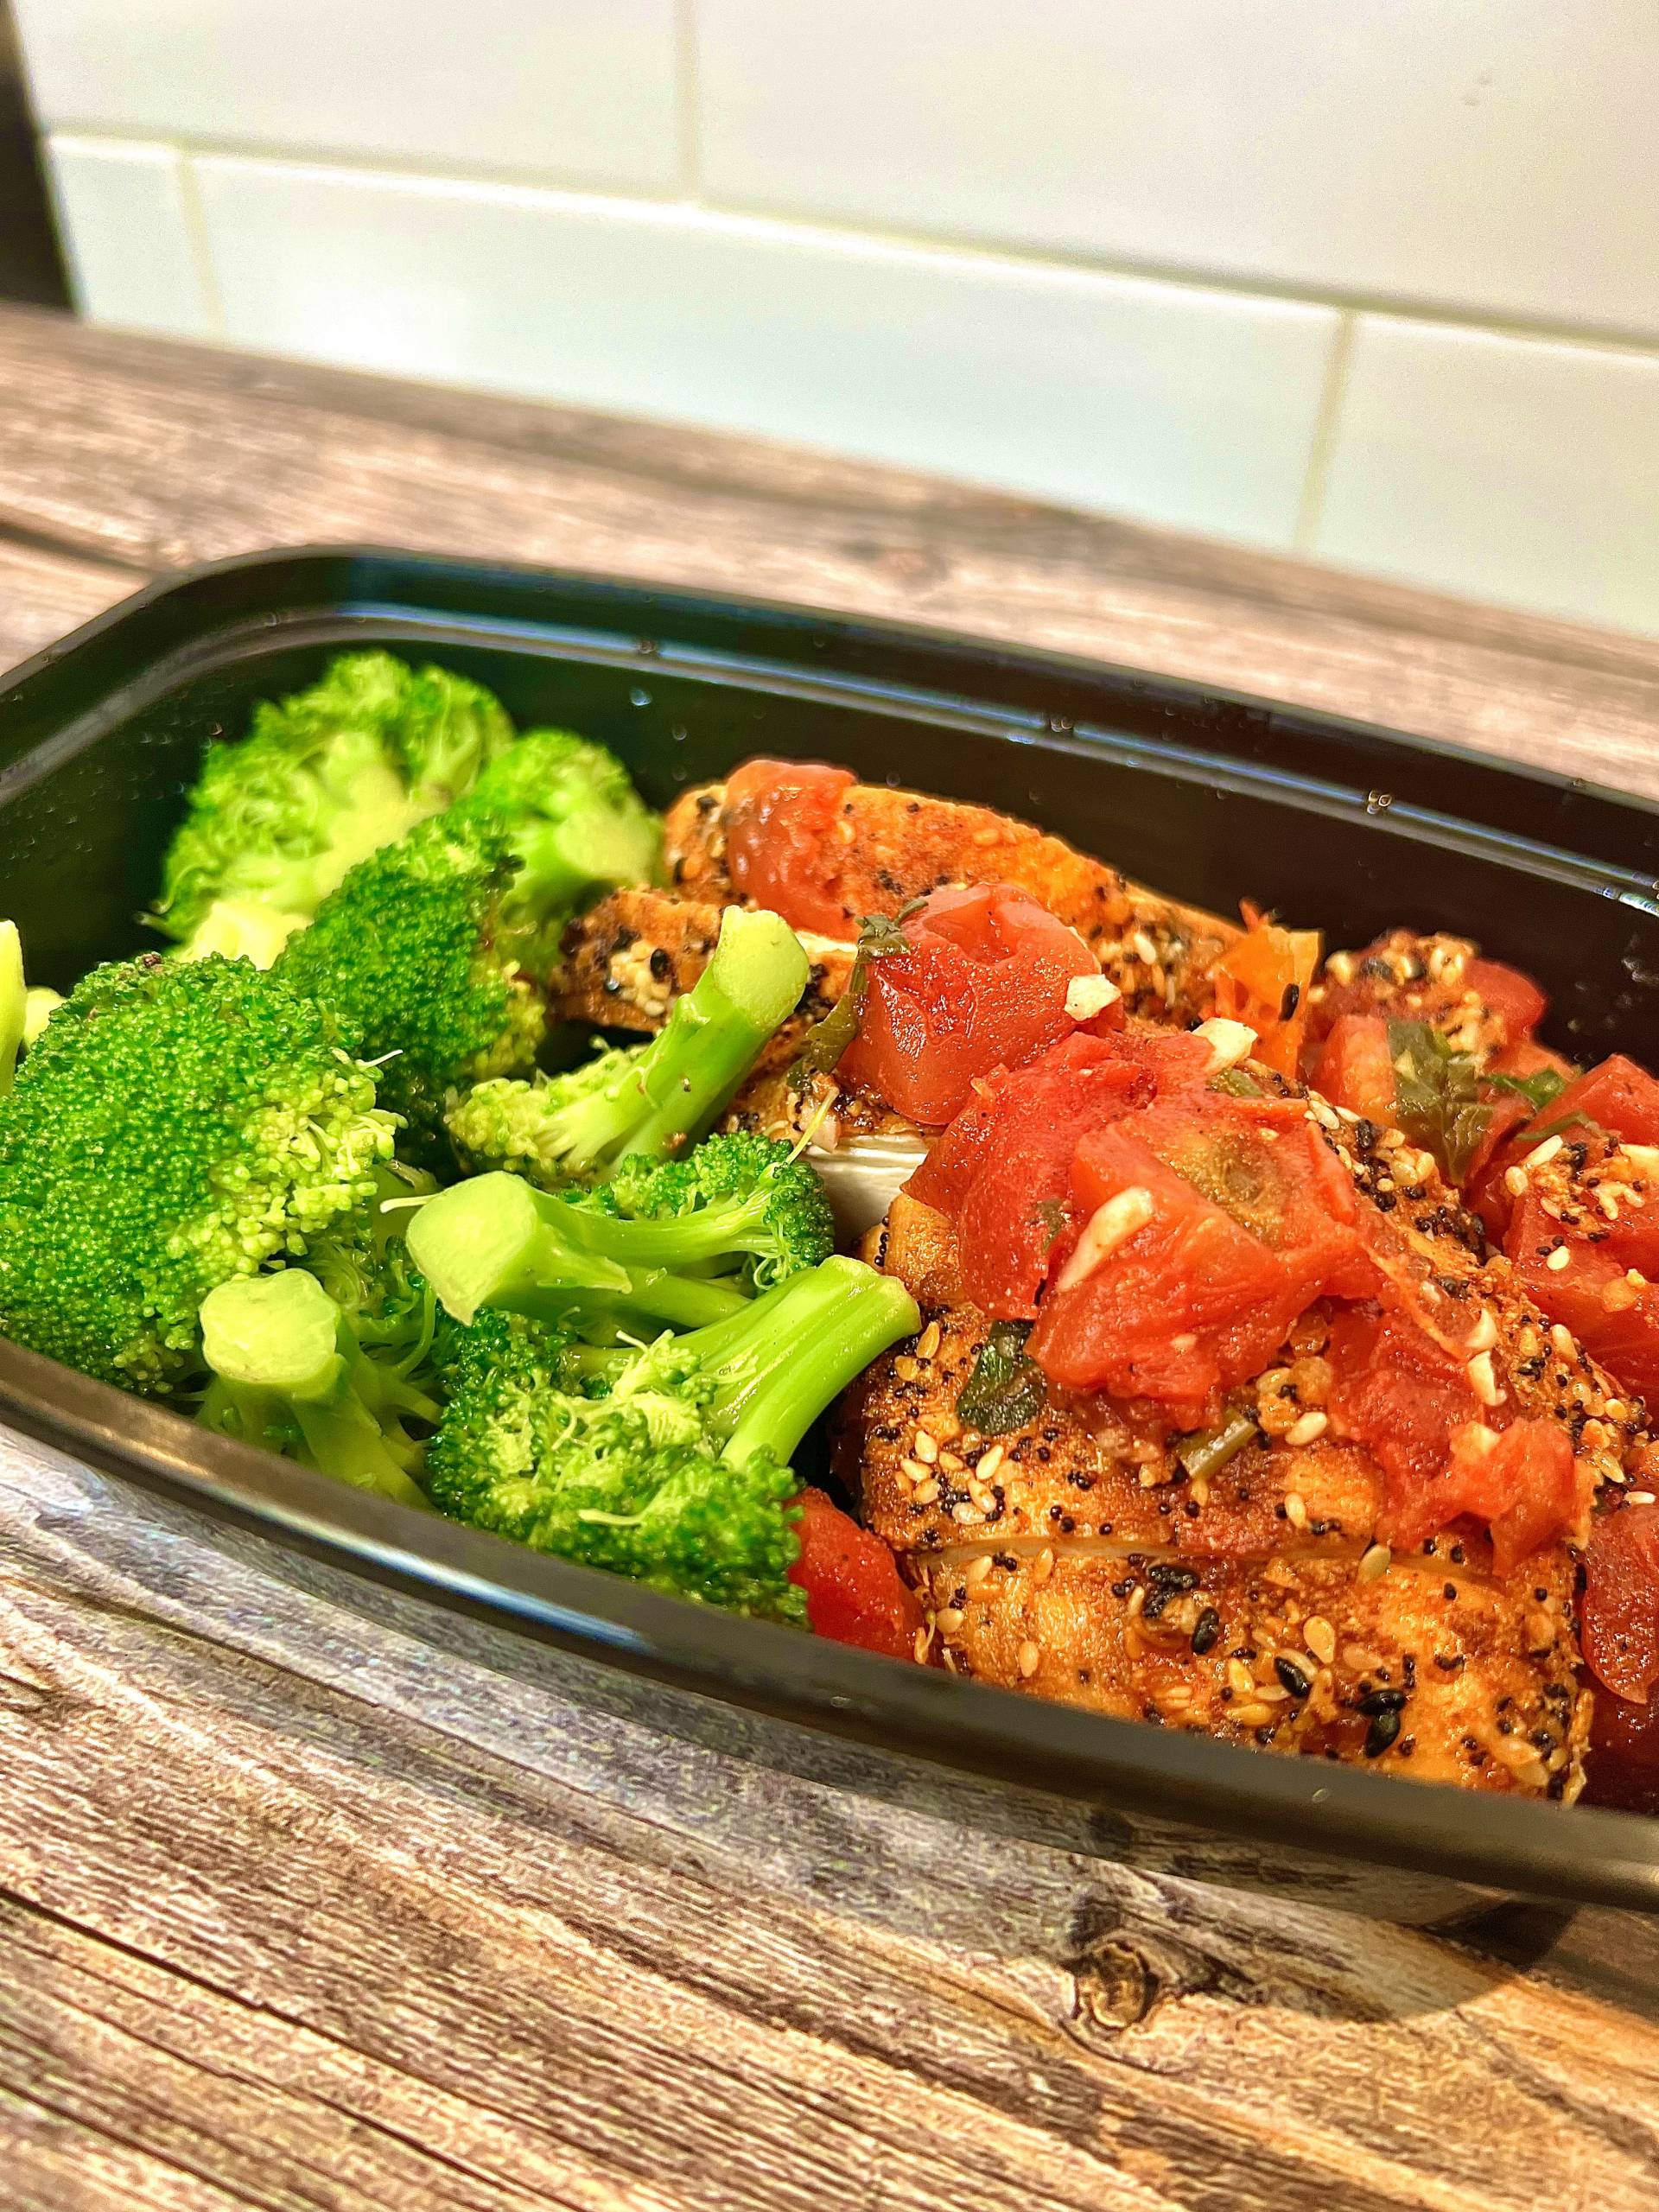 (KETO) Everything Bagel Chicken With Broccoli, Tomatoes & Garlic